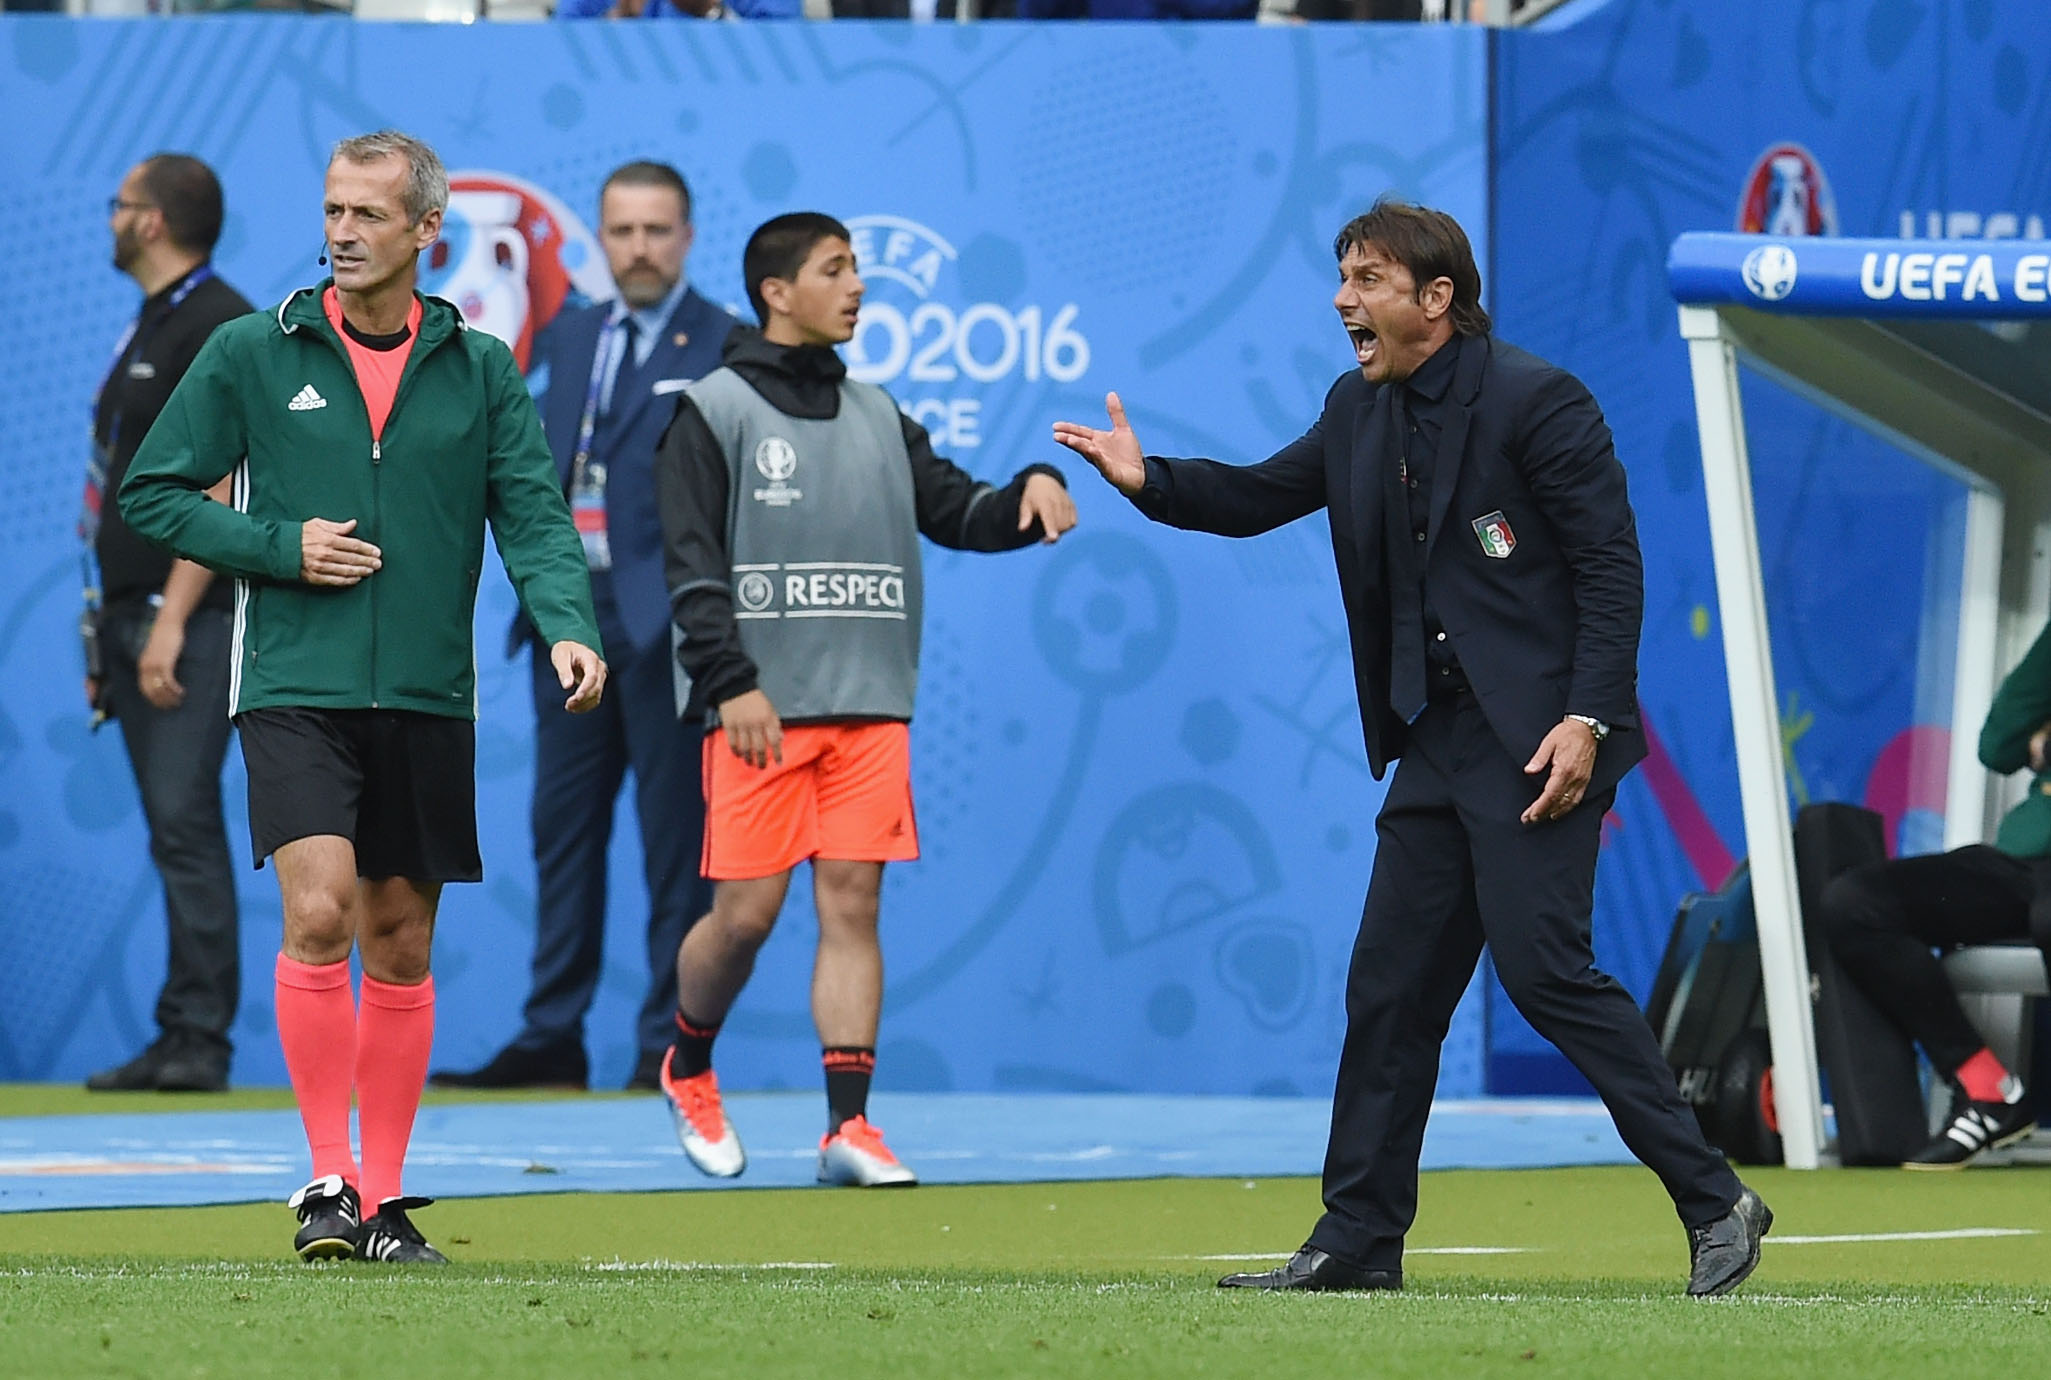 PARIS, FRANCE - JUNE 27:  Antonio Conte head coach of Italy gestures during the UEFA EURO 2016 round of 16 match between Italy and Spain at Stade de France on June 27, 2016 in Paris, France.  (Photo by Claudio Villa/Getty Images)